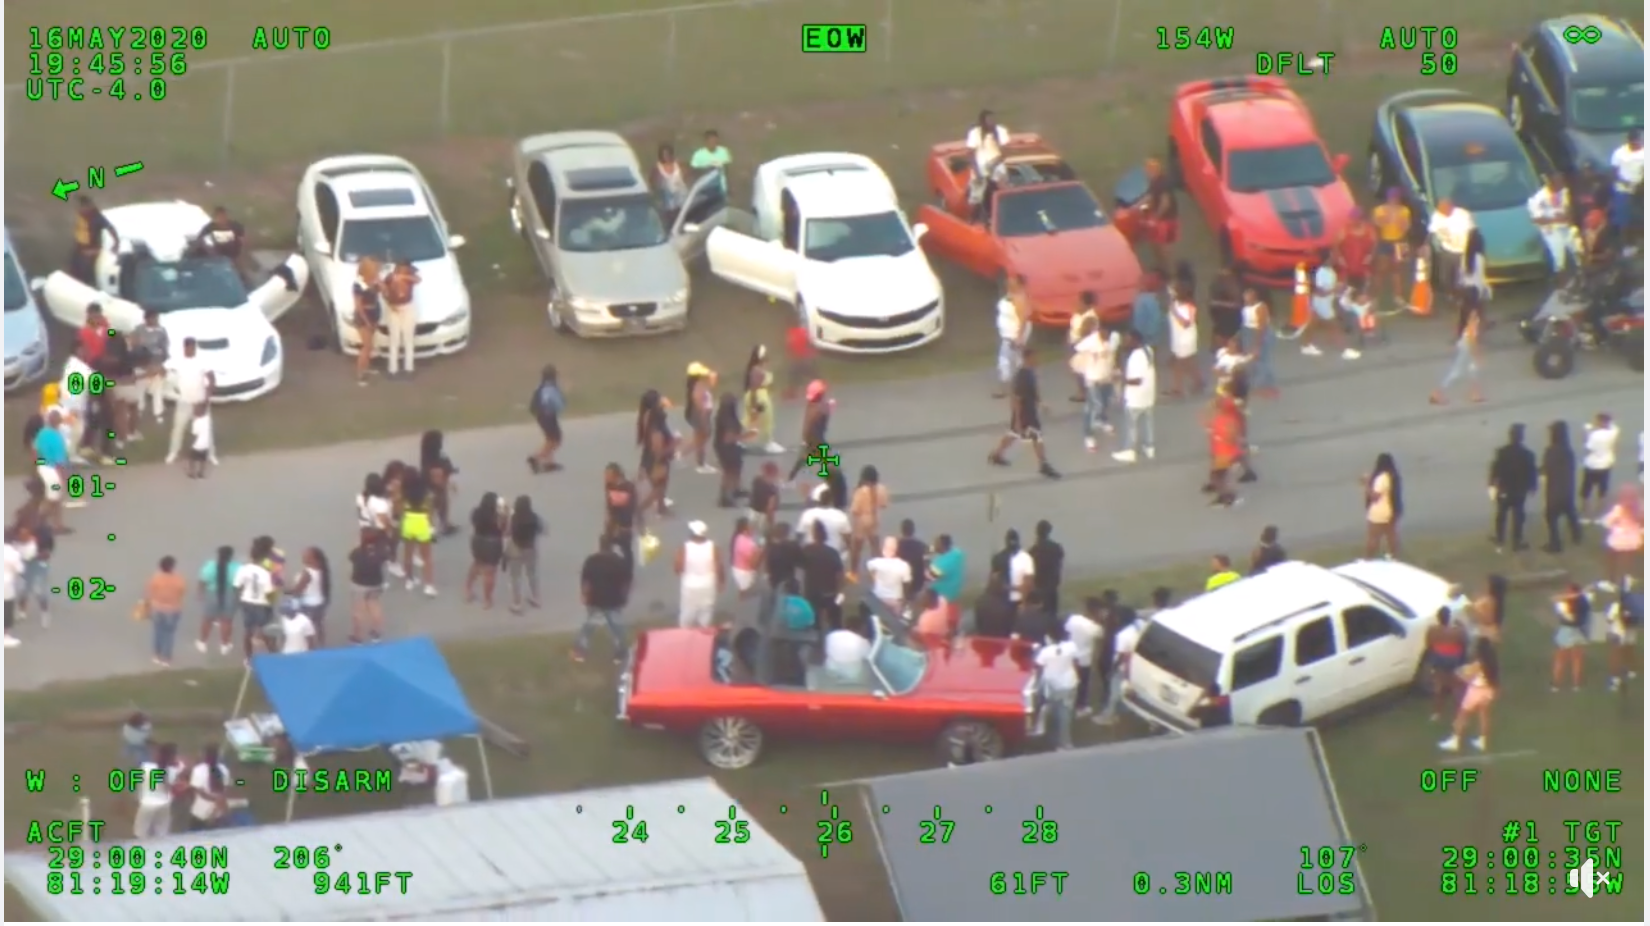 3,000-Person Block Party In Florida Leads To Arrests, Claims Of Racism